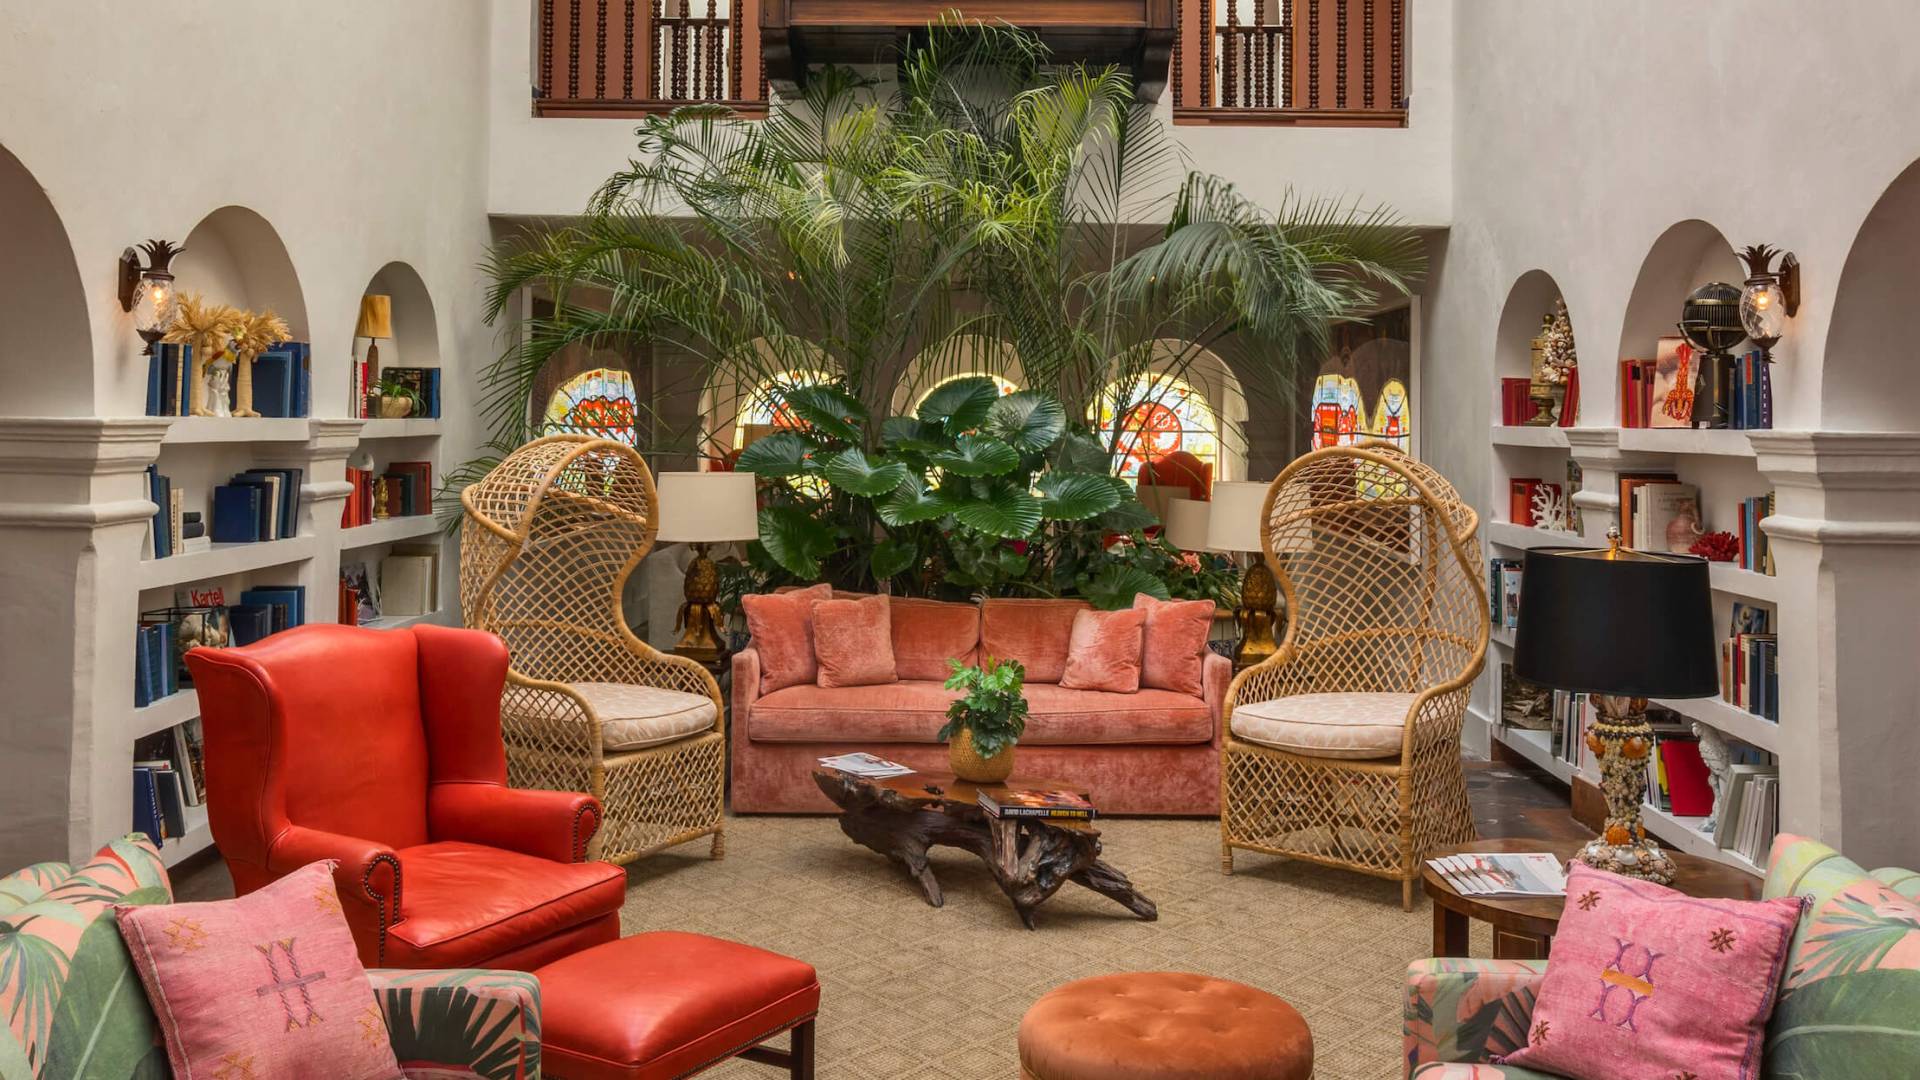 atrium of hotel filled with red, pink, green, and wicker furniture